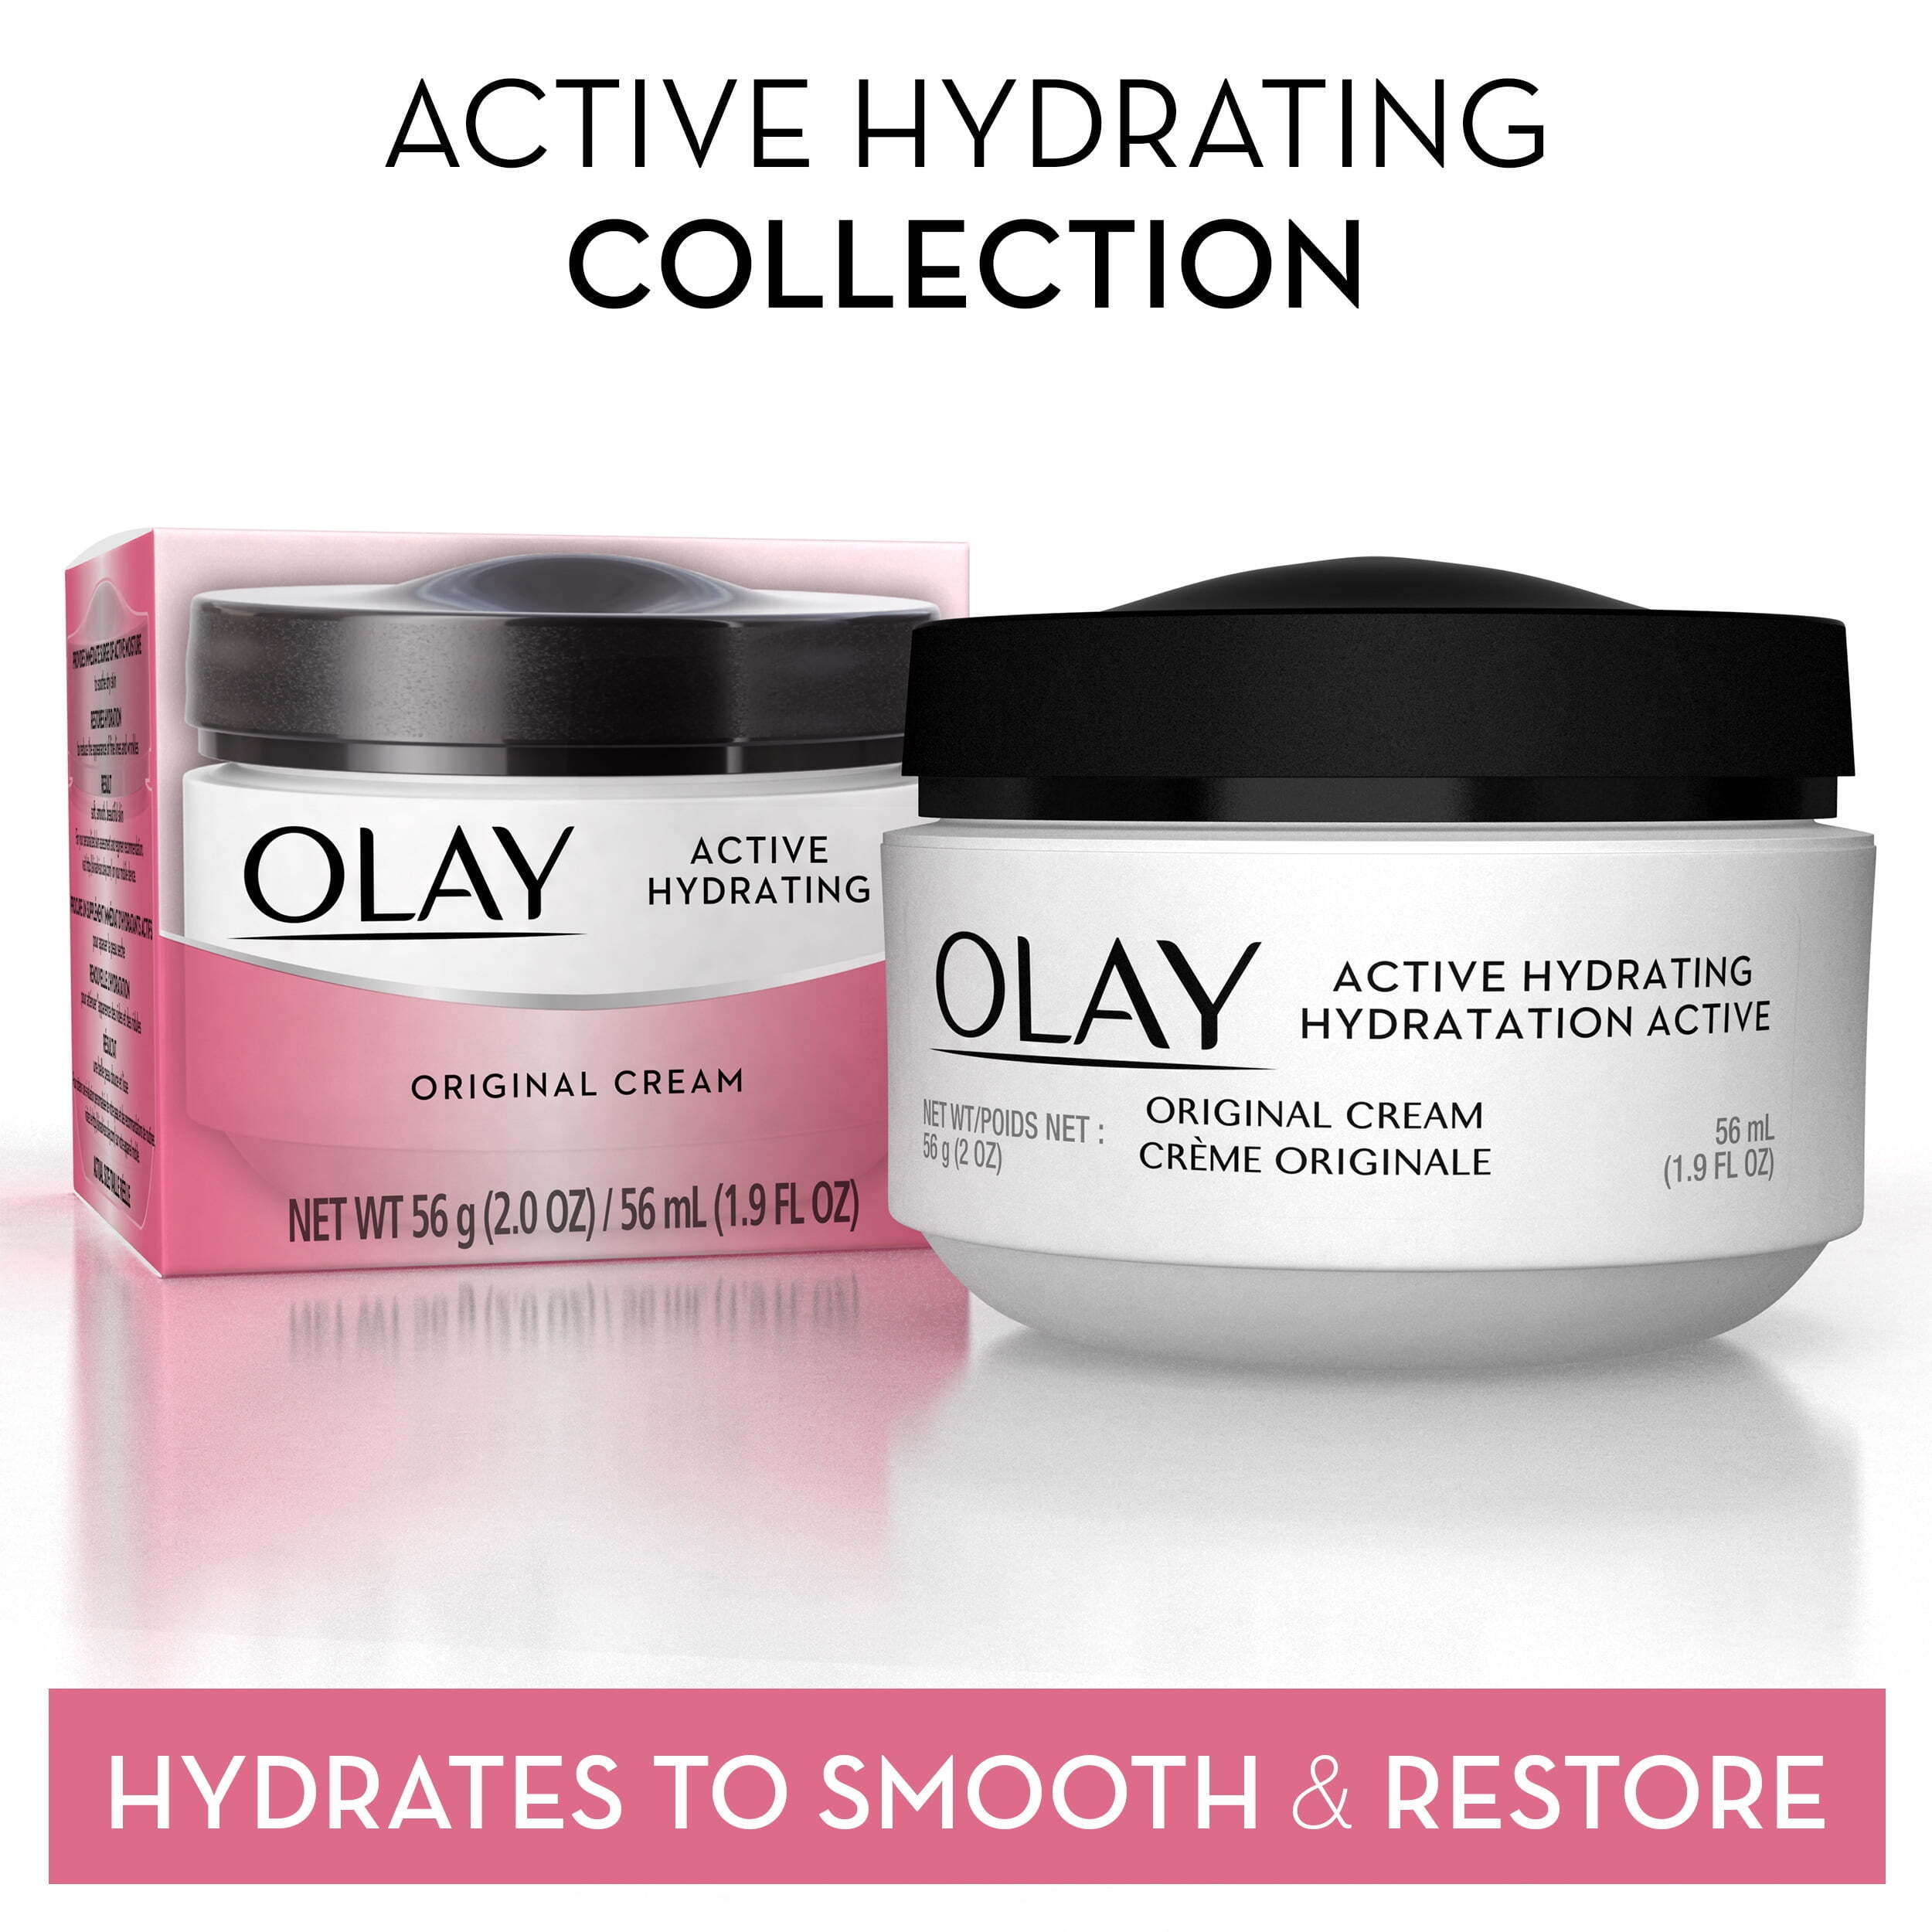 Olay Active Hydrating Face Cream for Women, Fights Fine Lines & Wrinkles for Dry Skin, 1.9 oz | MTTS315